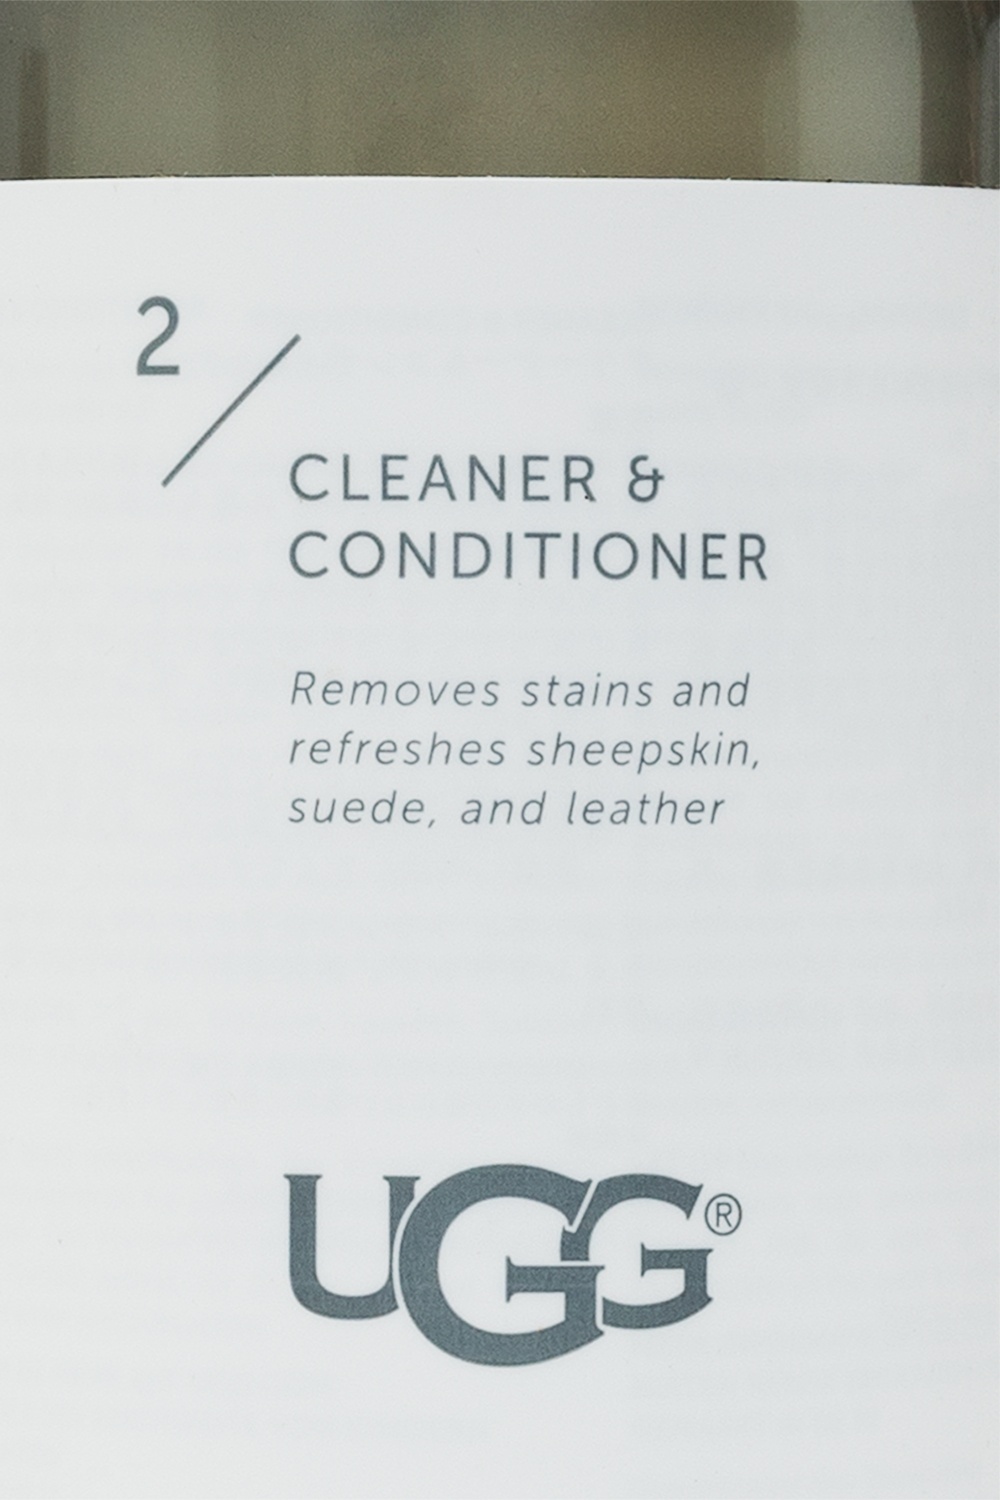 UGG Shoe cleaner and conditioner